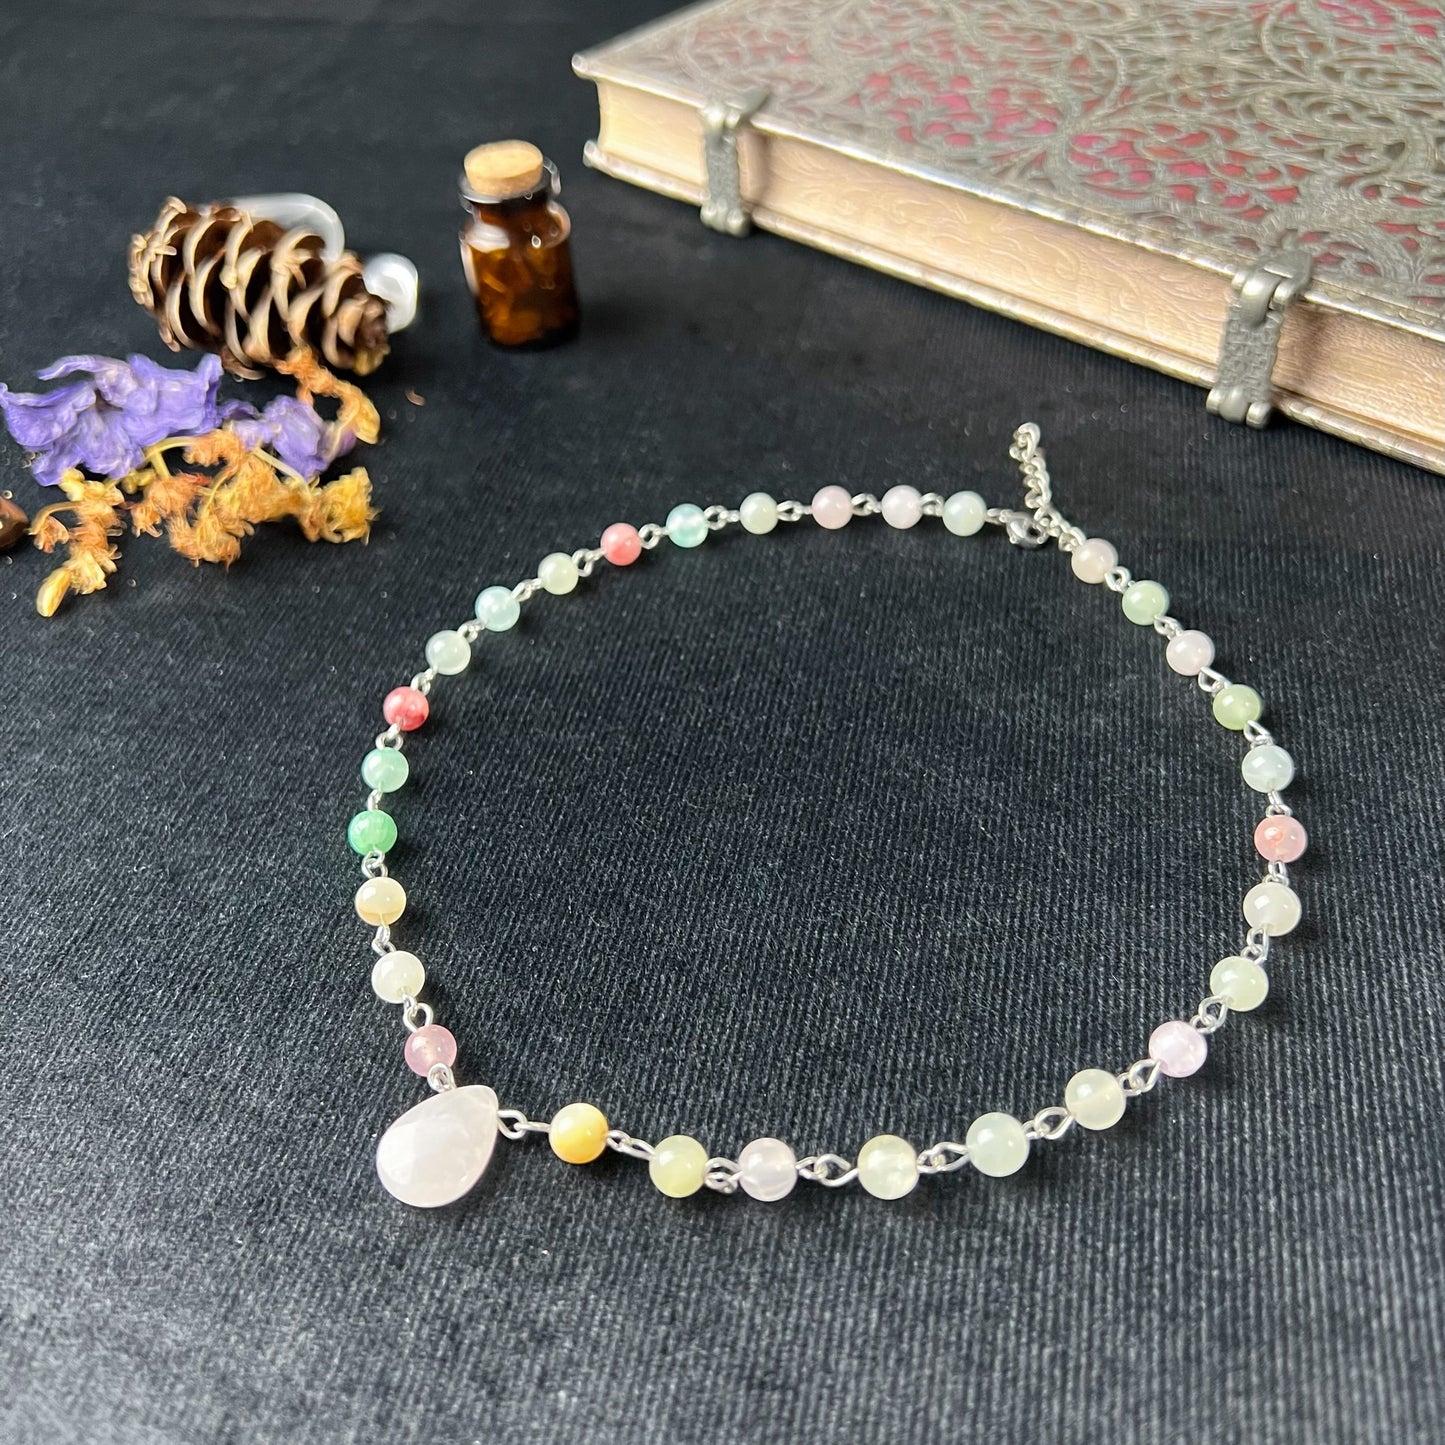 Rose quartz and pastel agate beads romantic choker - The French Witch shop